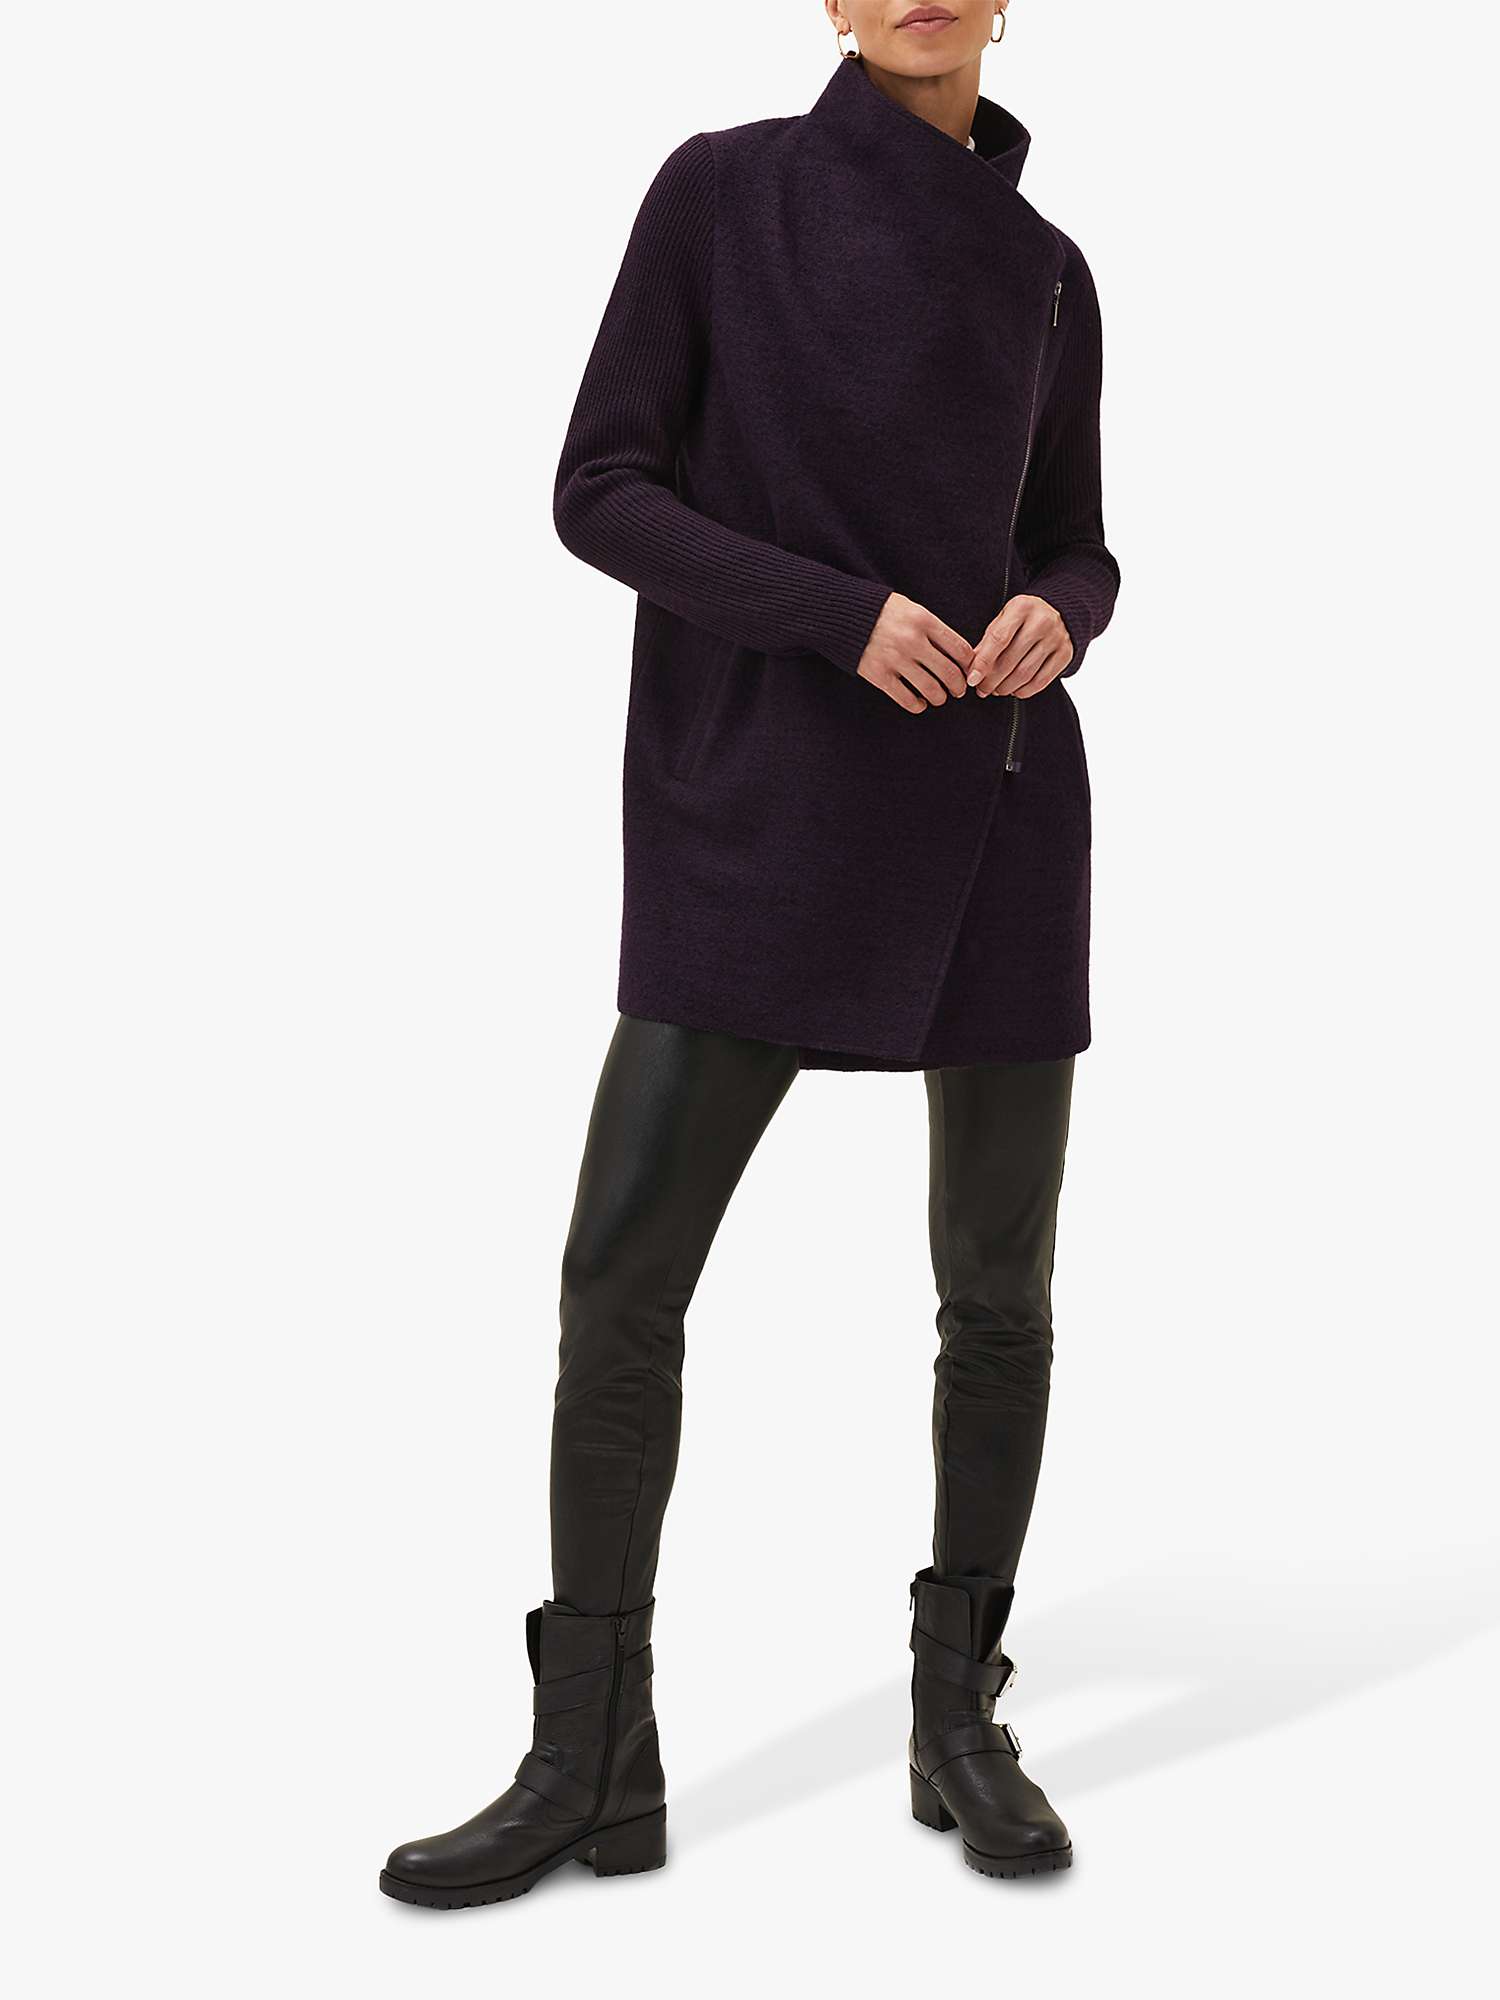 Buy Phase Eight Byanca Zip Up Knit Coat, Blackcurrant Online at johnlewis.com